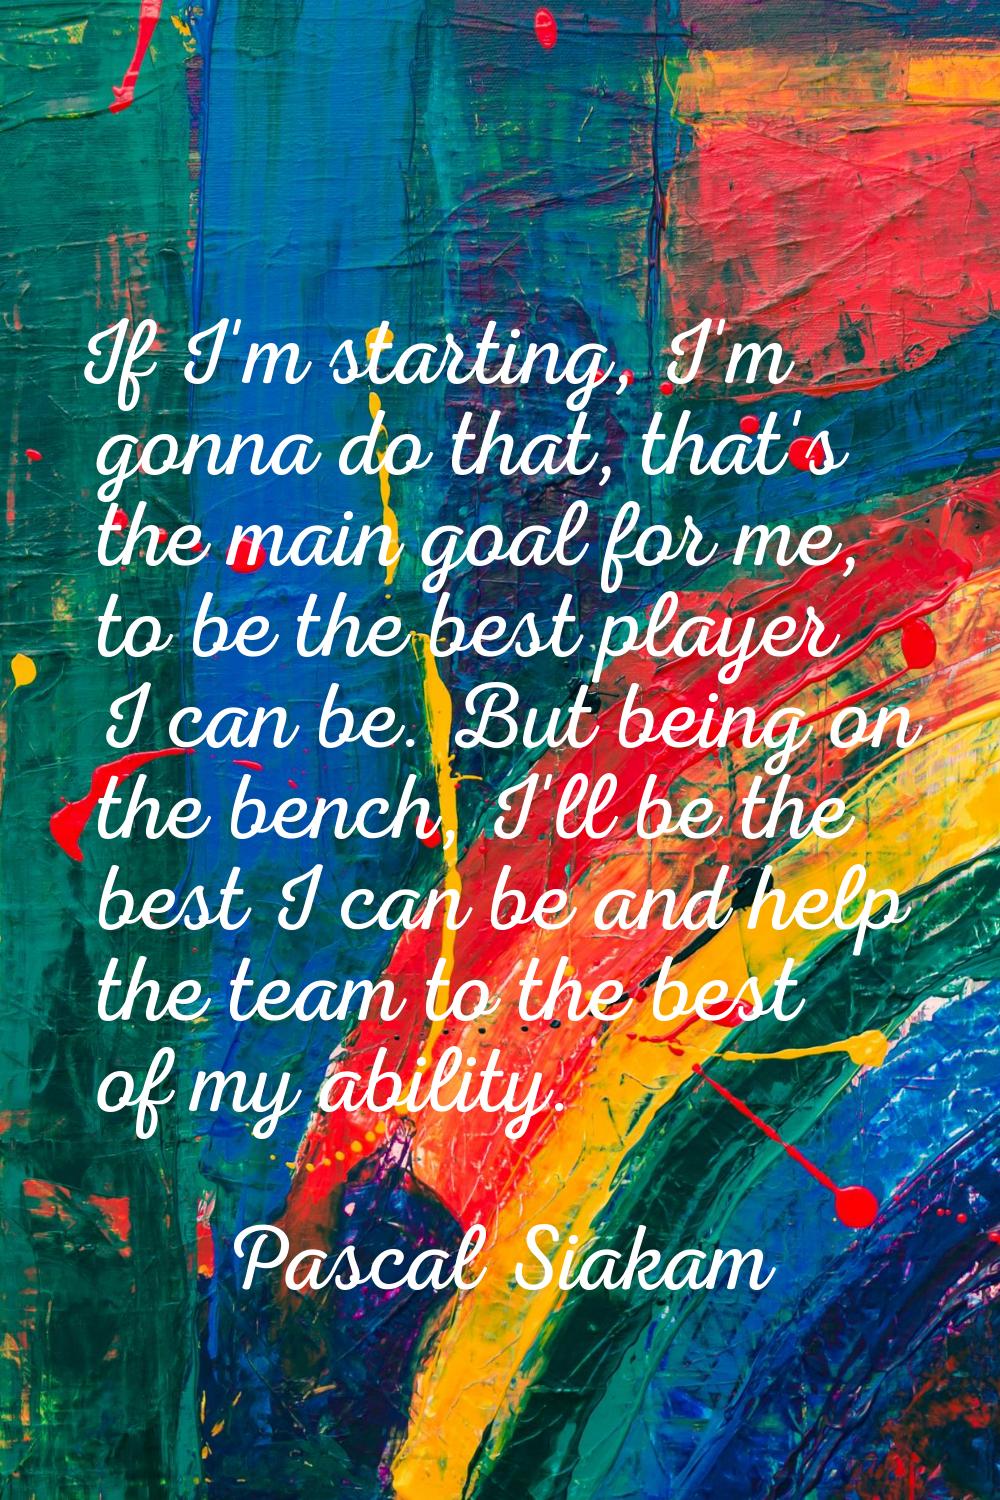 If I'm starting, I'm gonna do that, that's the main goal for me, to be the best player I can be. Bu